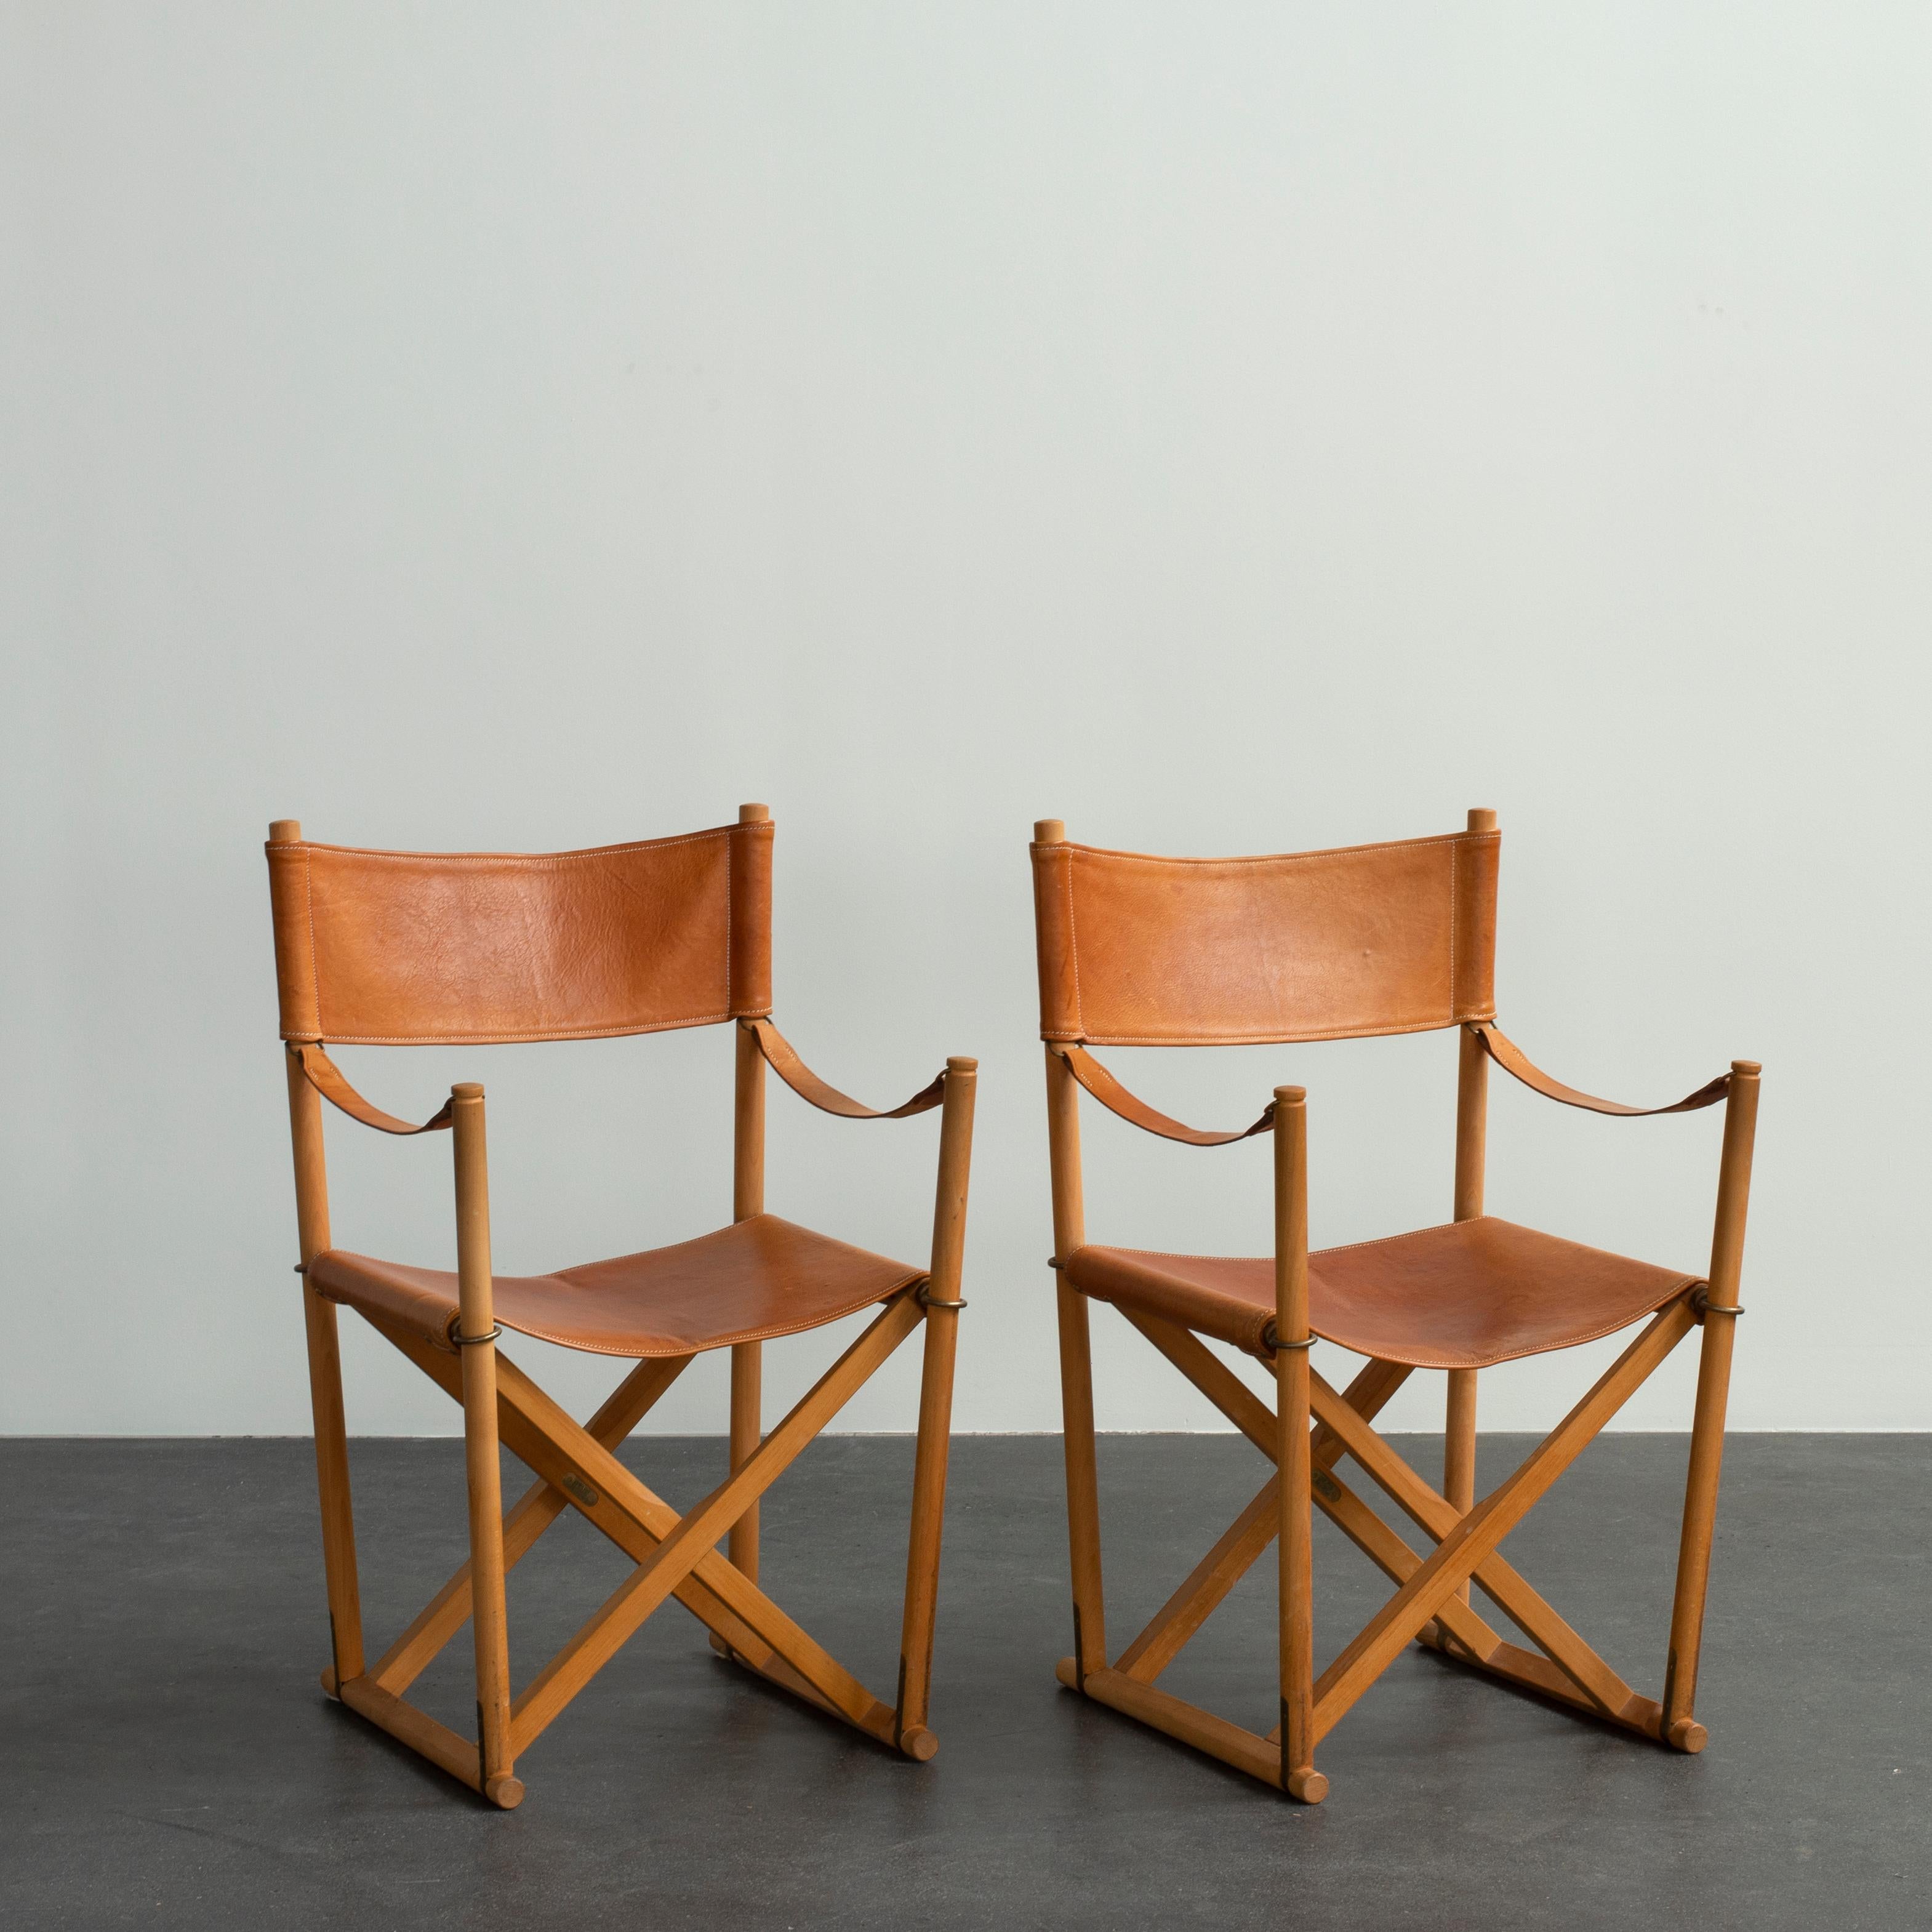 Mogens Koch pair of folding chairs in beech and vegetable-tanned leather. Executed by Rud. Rasmussen, Copenhagen, Denmark.